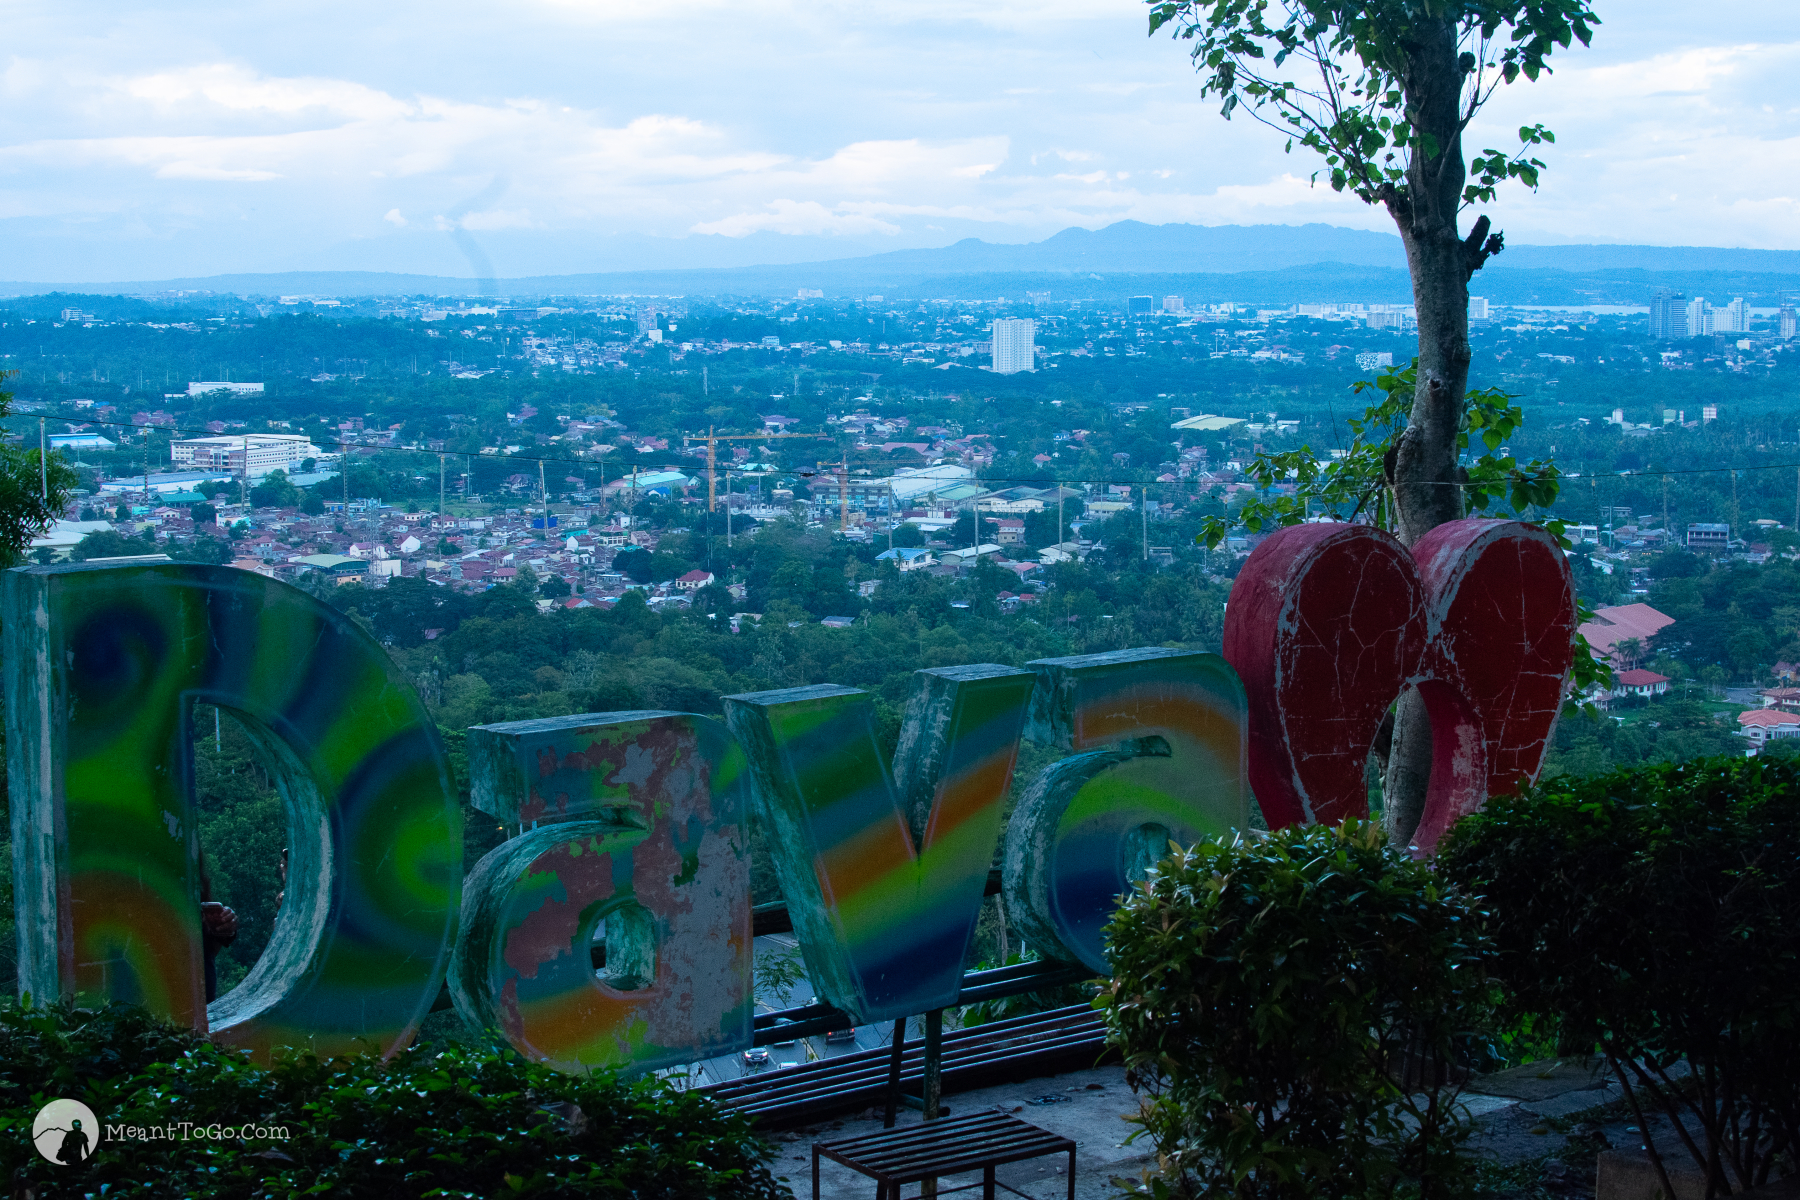 Davao City Panorama as seen from Vista View